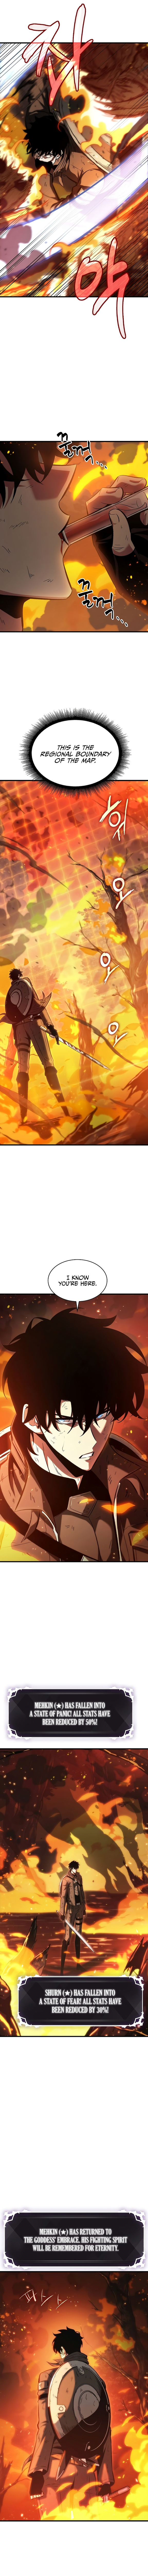 Pick Me Up Chapter 33 page 5